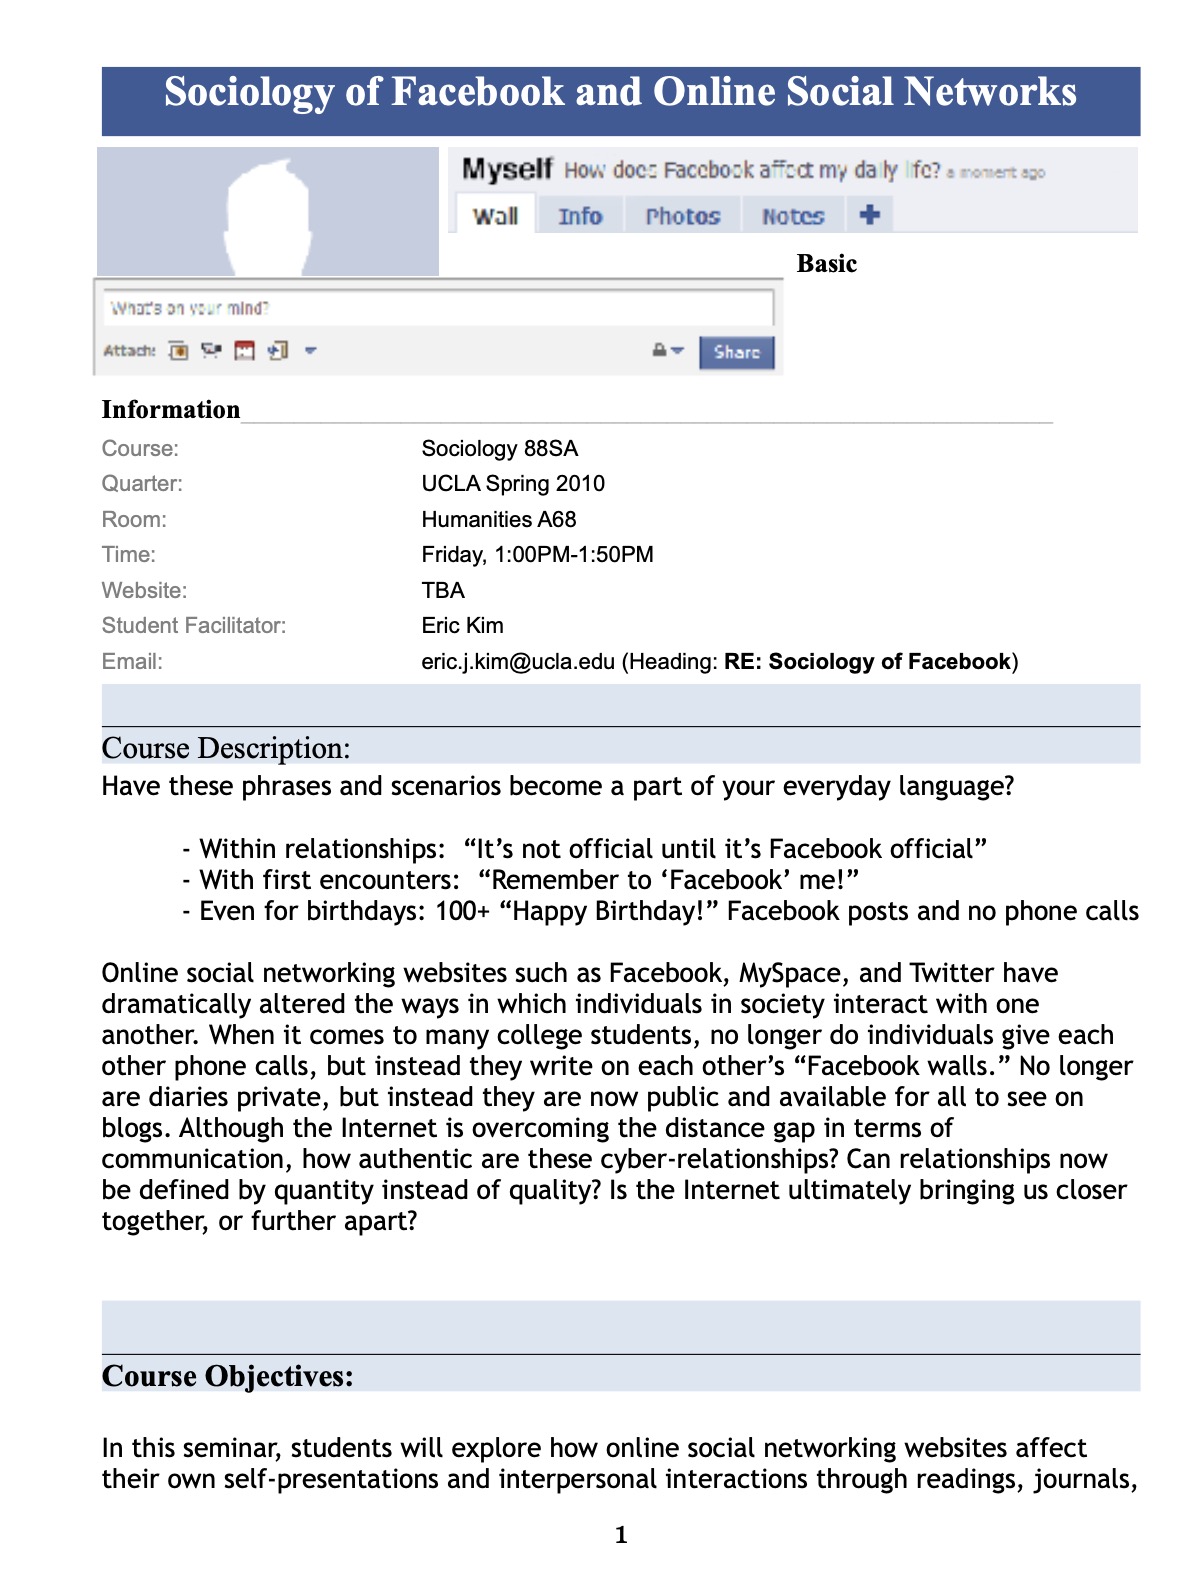 Sociology-of-Facebook-and-Online-Social-Networks-UCLA-ERIC-KIM-SYLLABUS-201000001